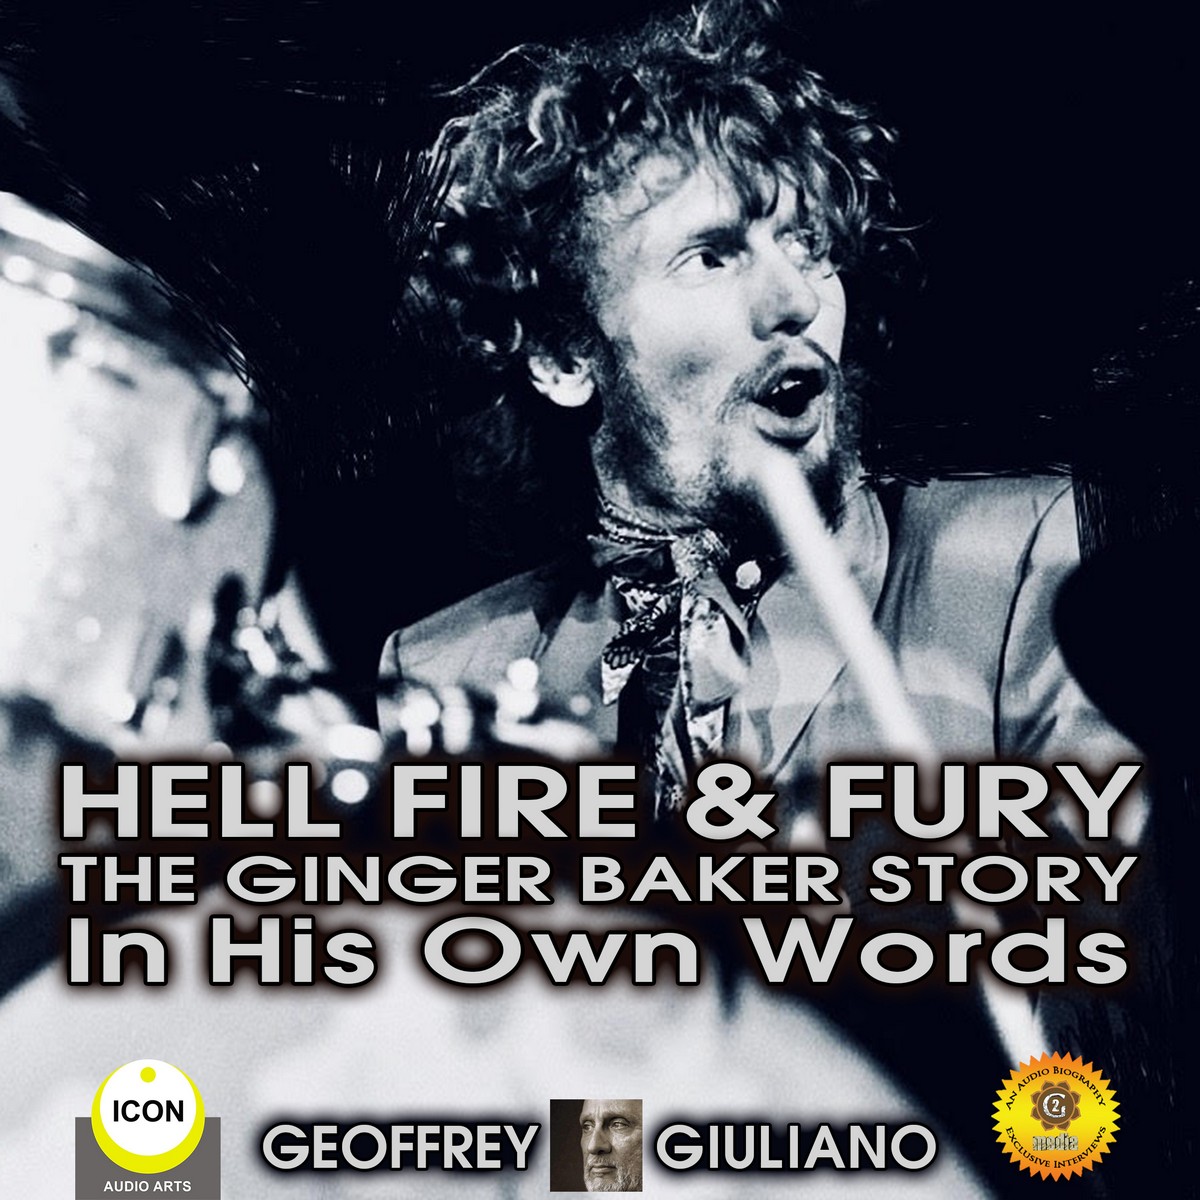 Hell Fire & Fury The Ginger Baker Story – In His Own Words